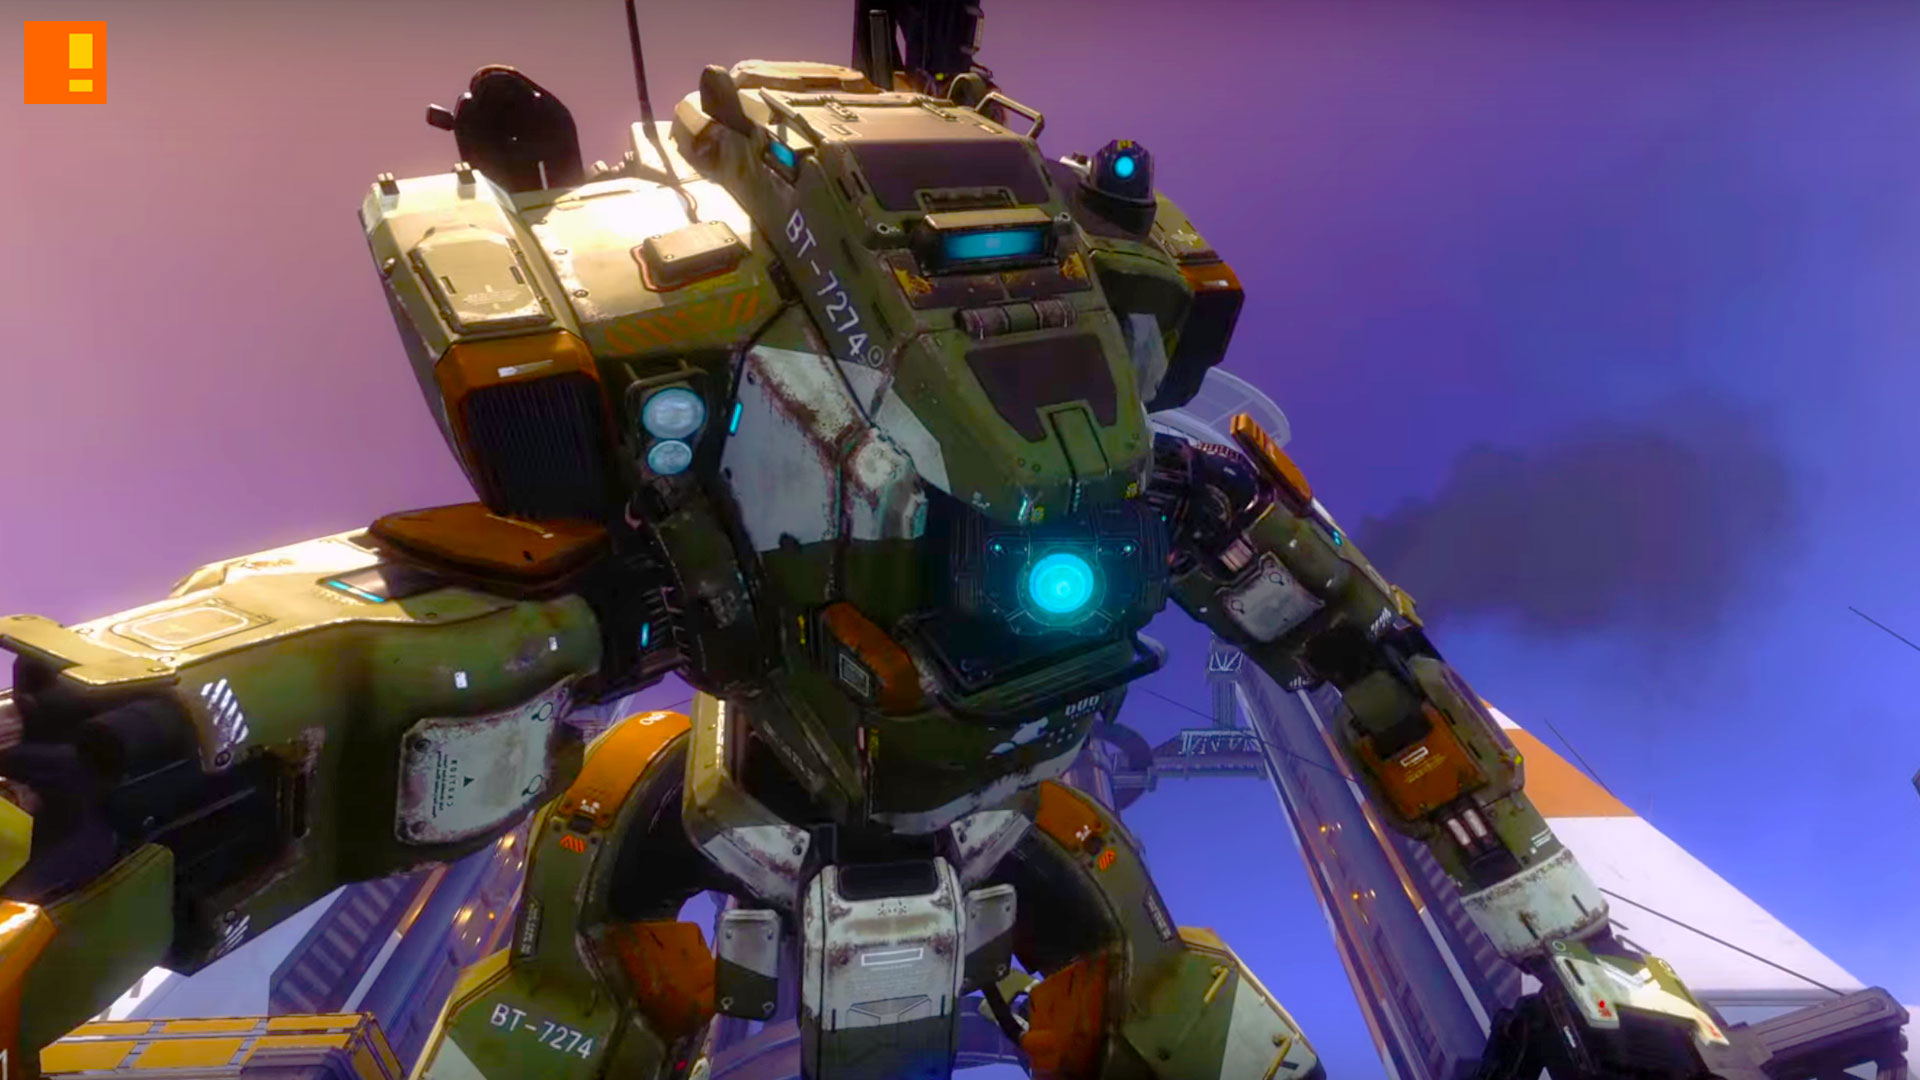 titanfall 2, respawn entertainment, the action pixel, single player, trailer, entertainment on tap, story mode, the action pixel